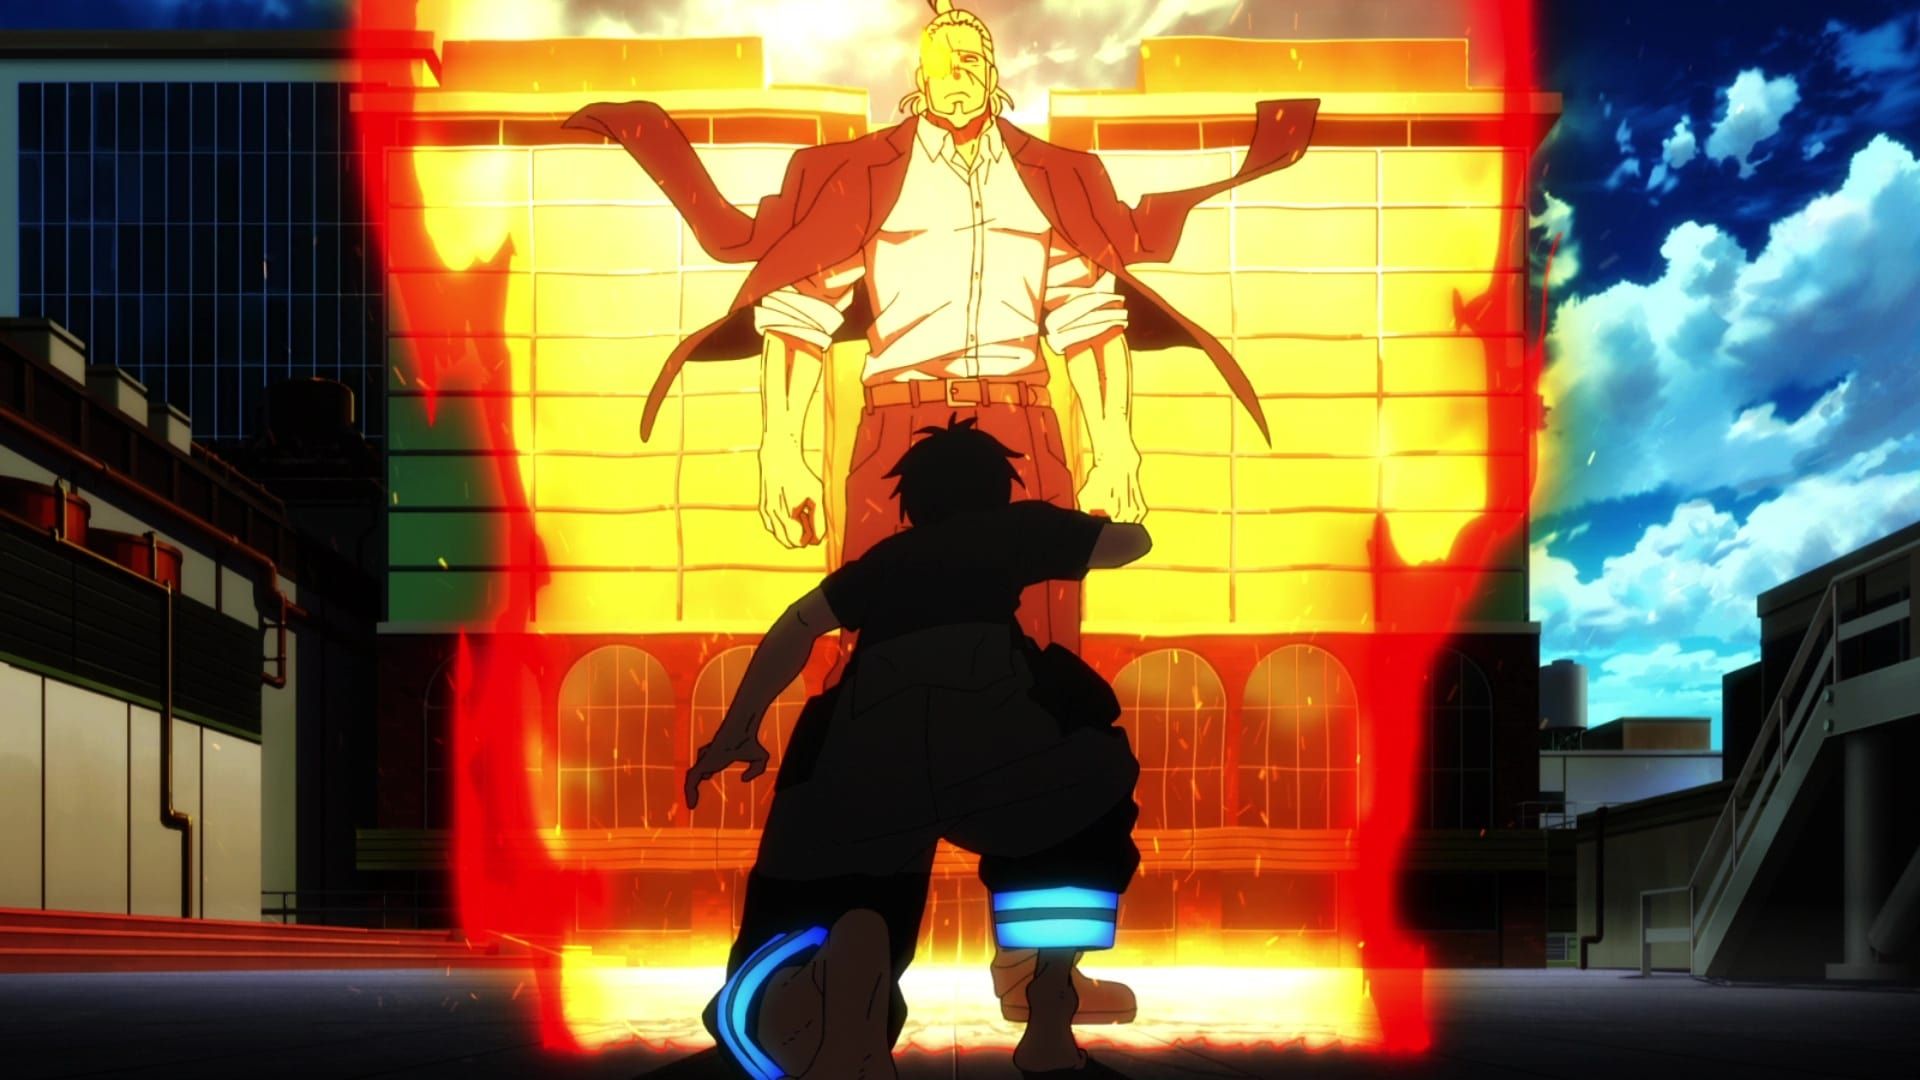 Fire Force background